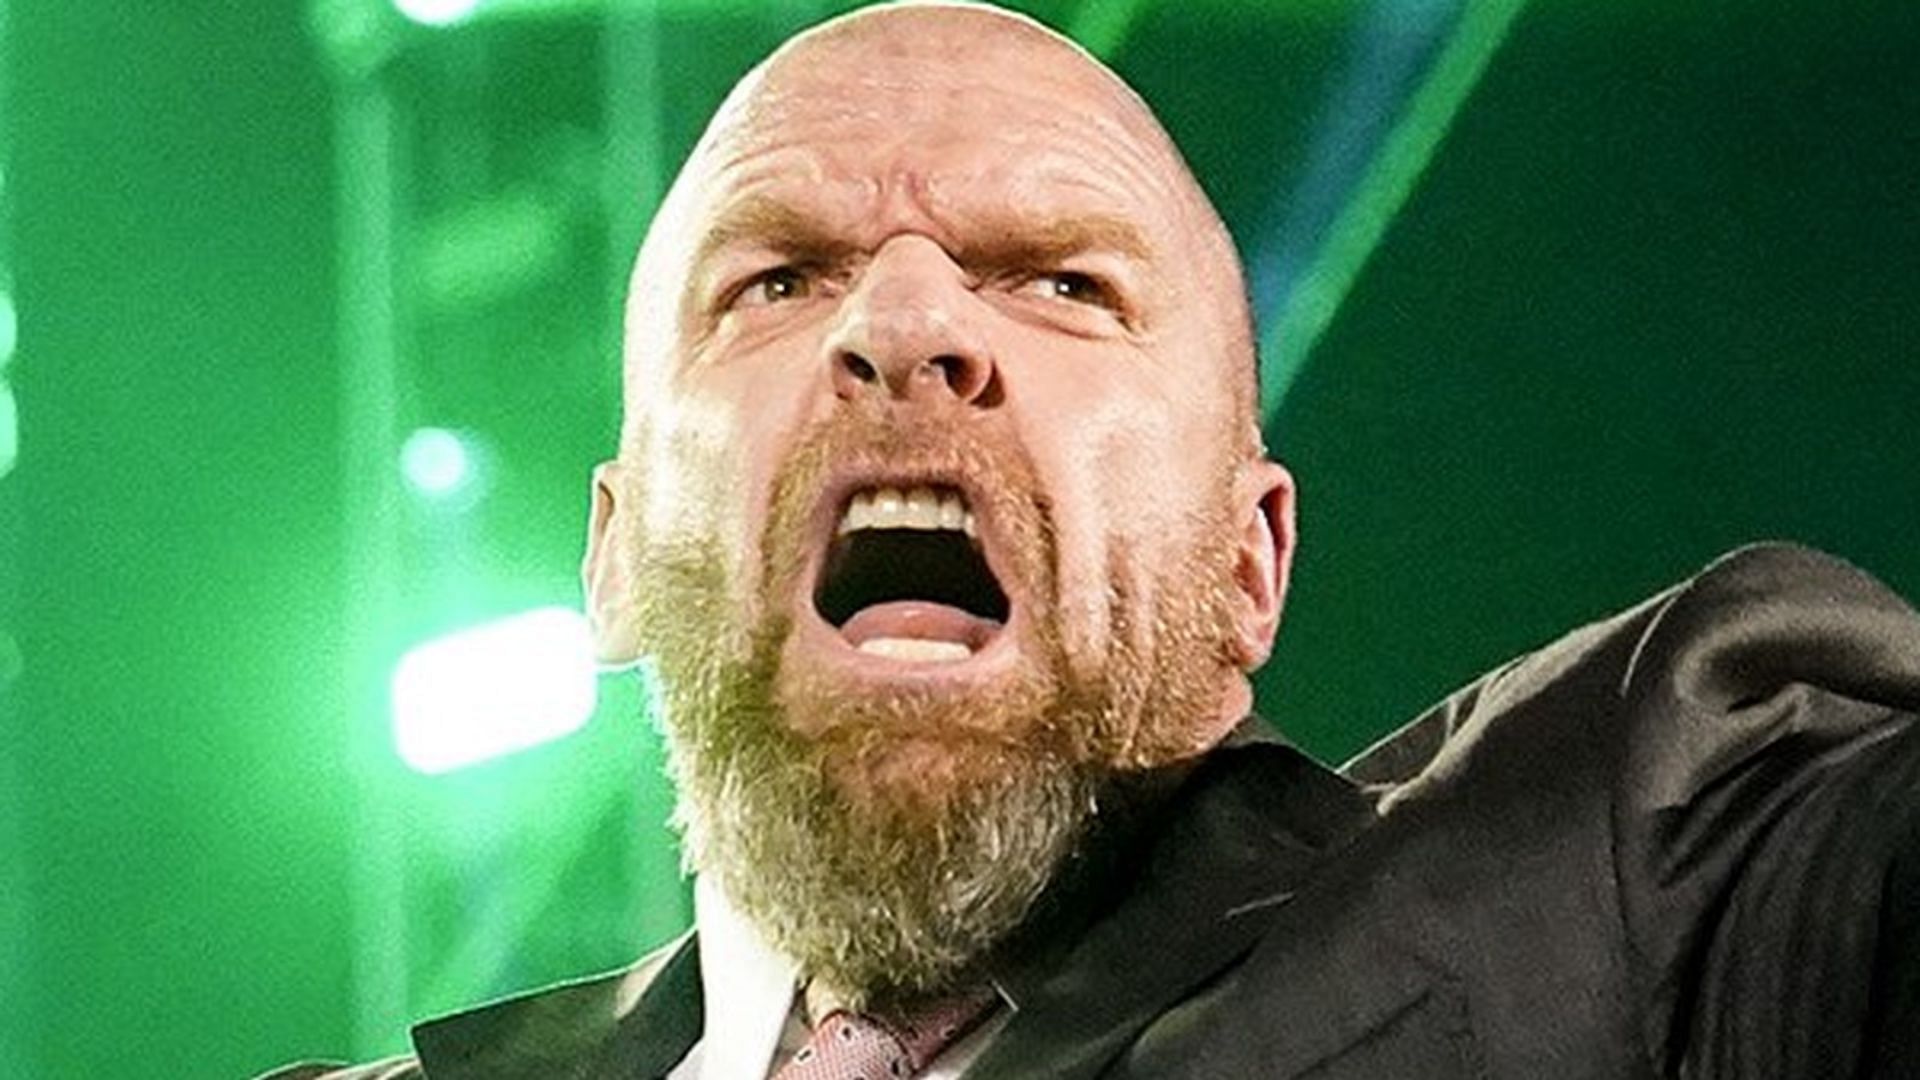 WWE CCO Triple H will return to television!